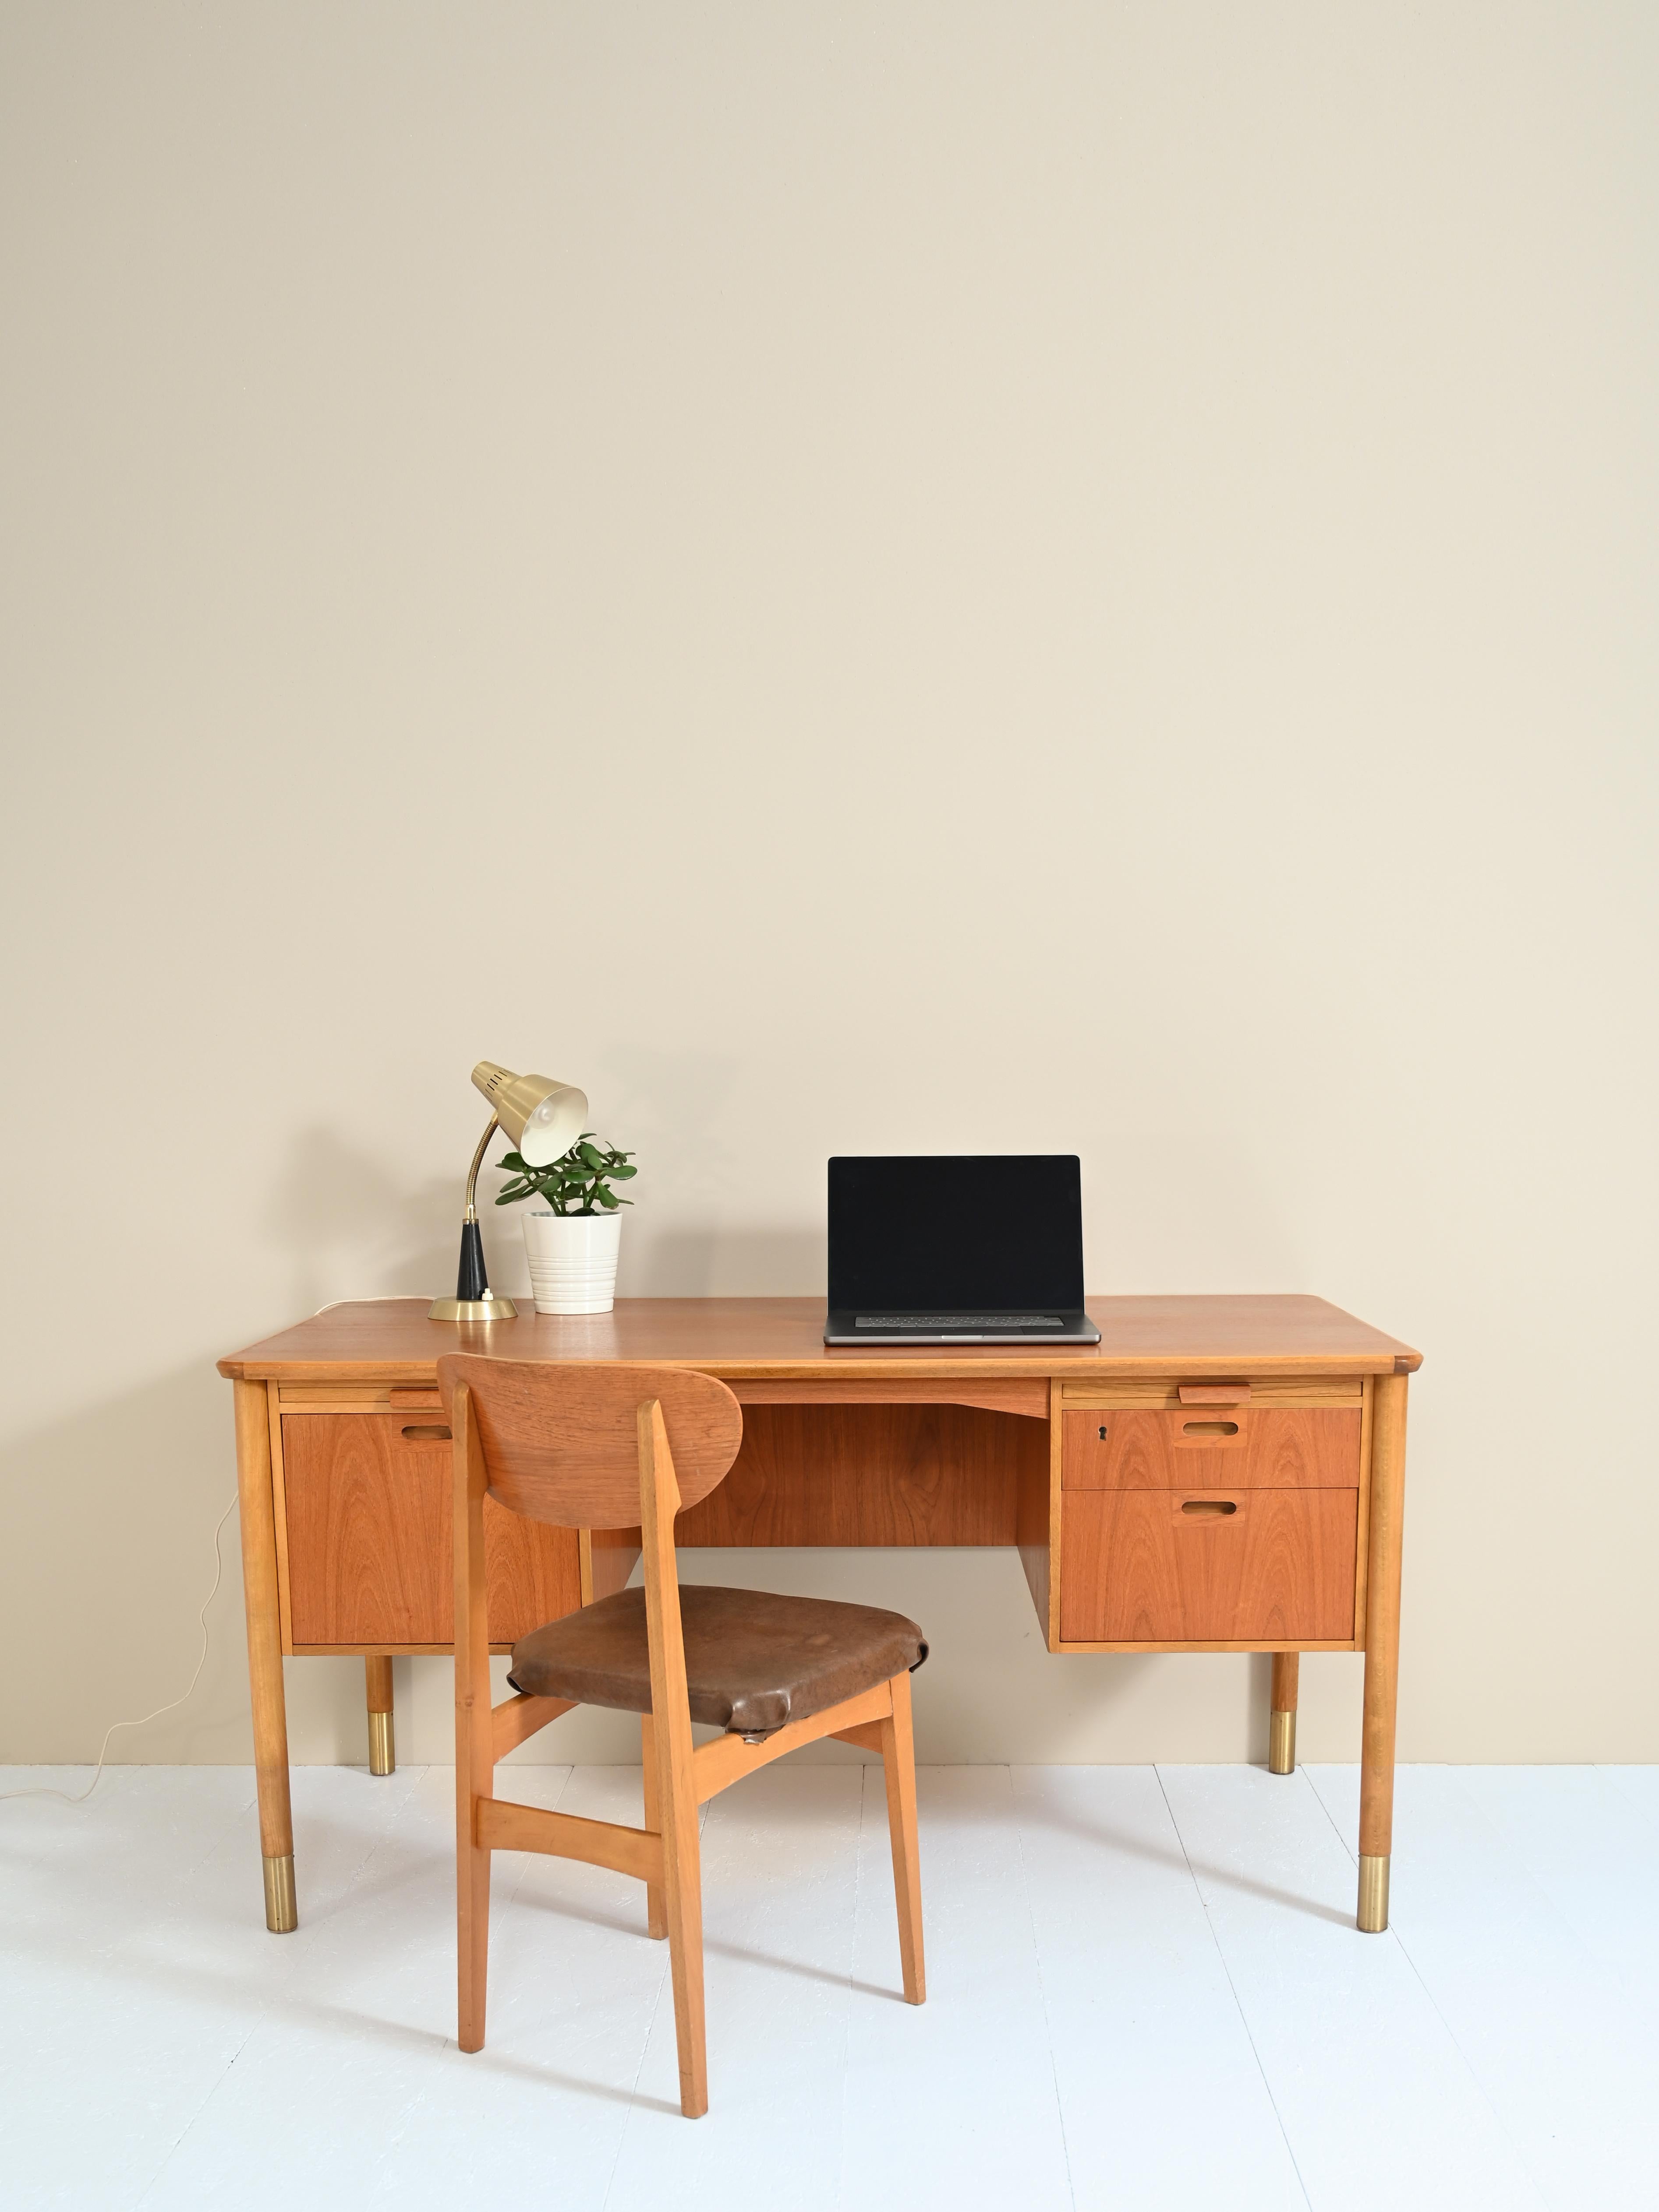 Danish-made teak 'center' desk with drawers.
It features a large work surface and three very roomy drawers. 
The quality of Danish craftsmanship is evident in the attention to detail and harmony of the structure. Although it is large in size, it